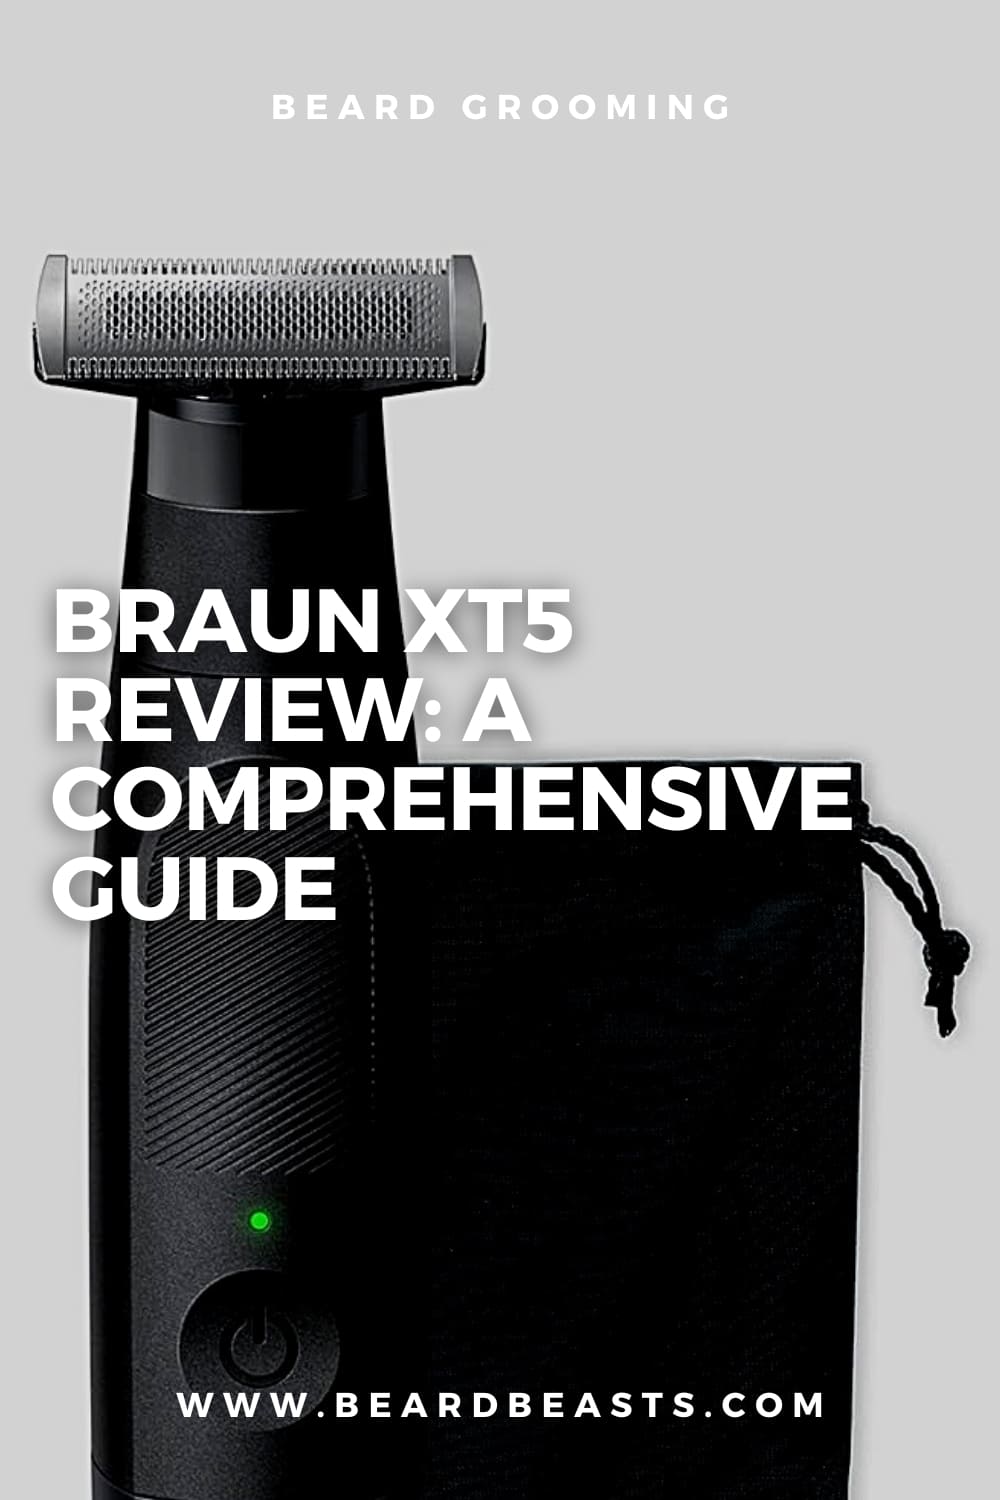 Black Braun XT5 electric shaver with precision head and LED indicator, featured on Beard Grooming section for 'Braun XT5 Review: A Beard Beasts Comprehensive Guide' article on www.beardbeasts.com.